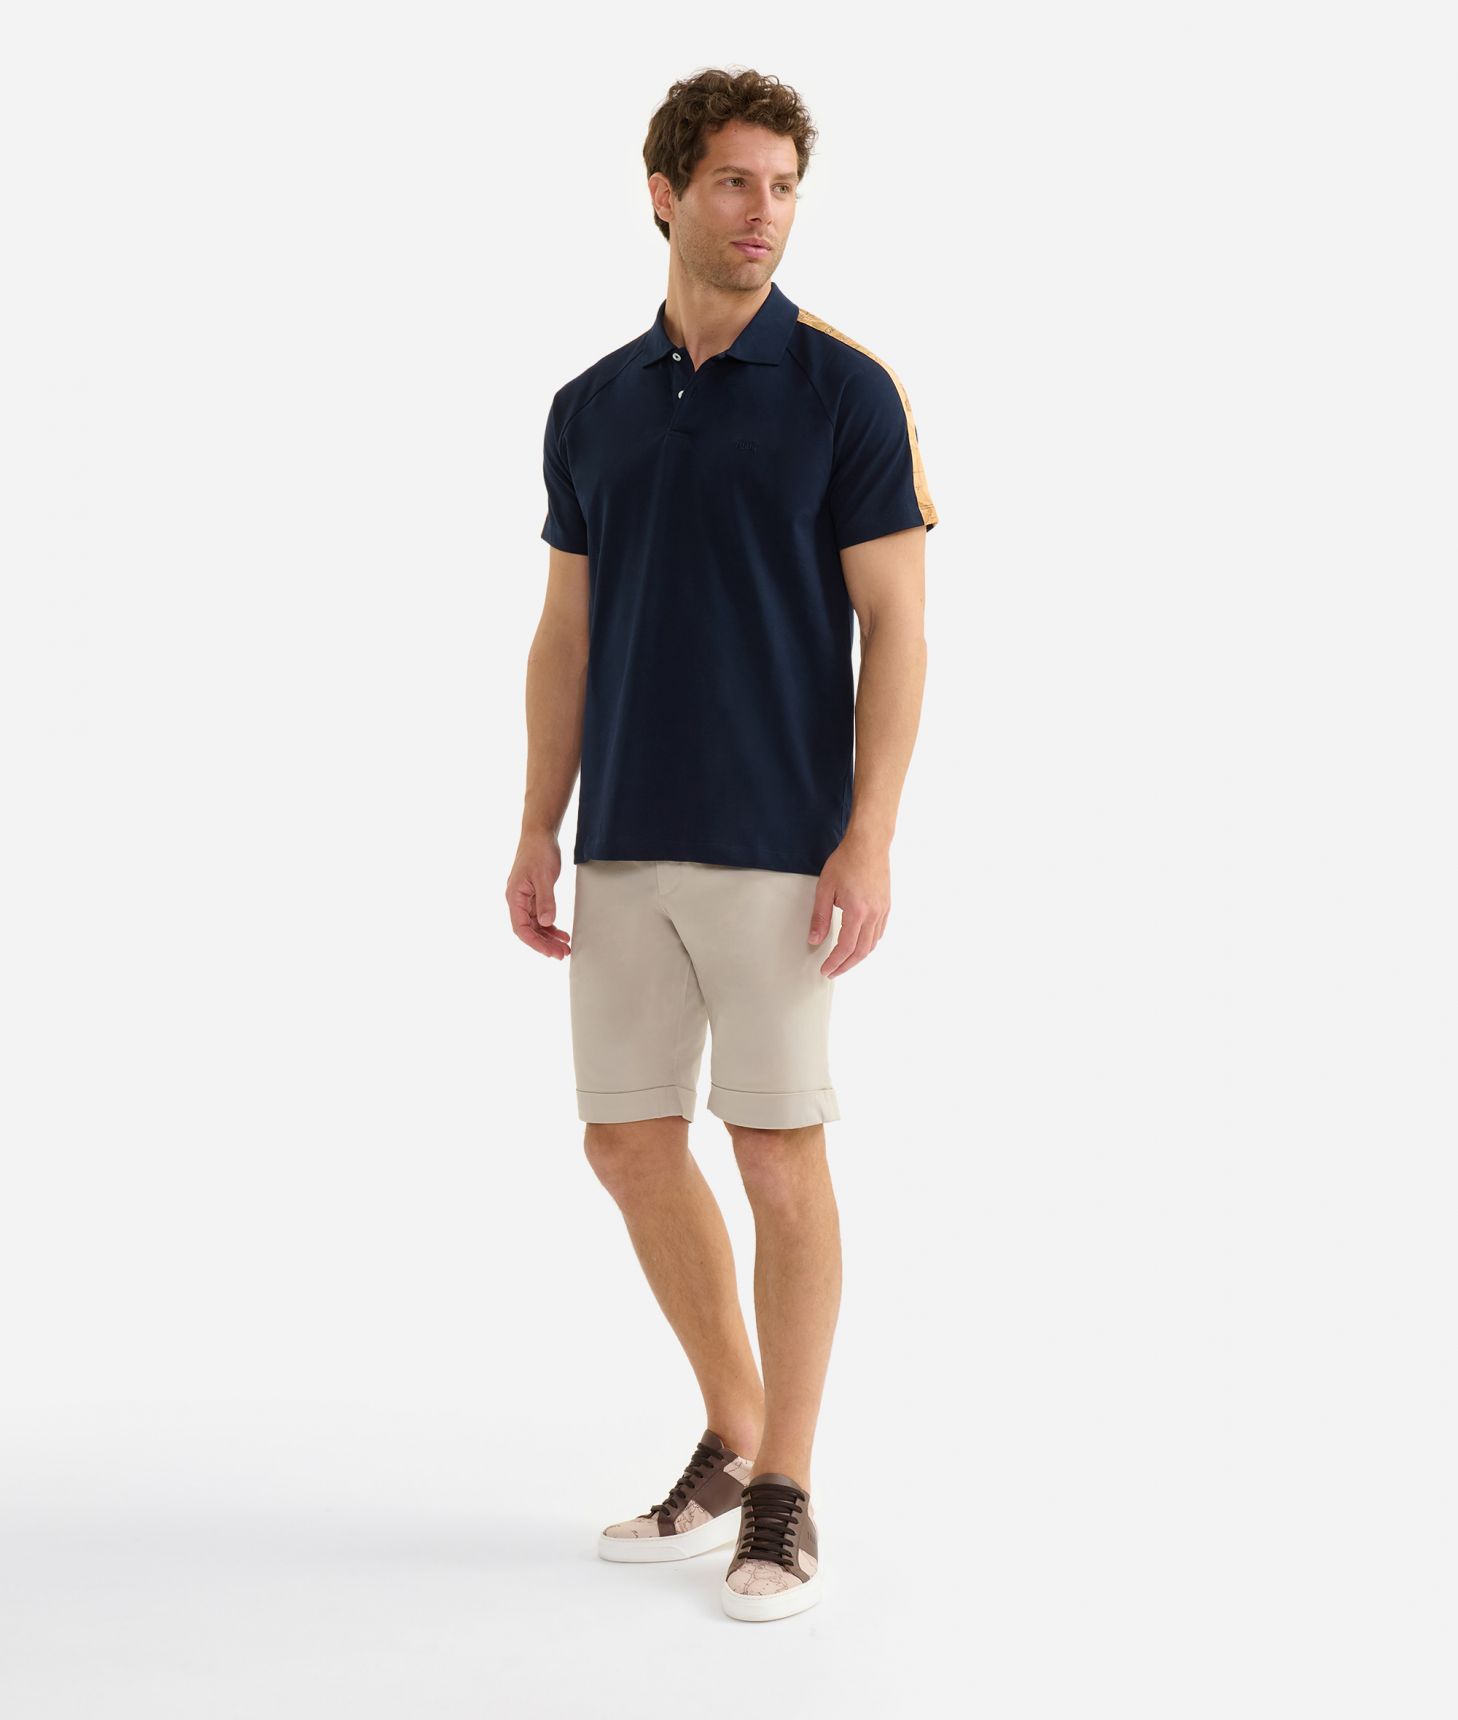 Piqué cotton jersey polo shirt with Geo Classic detail Navy Blue,front